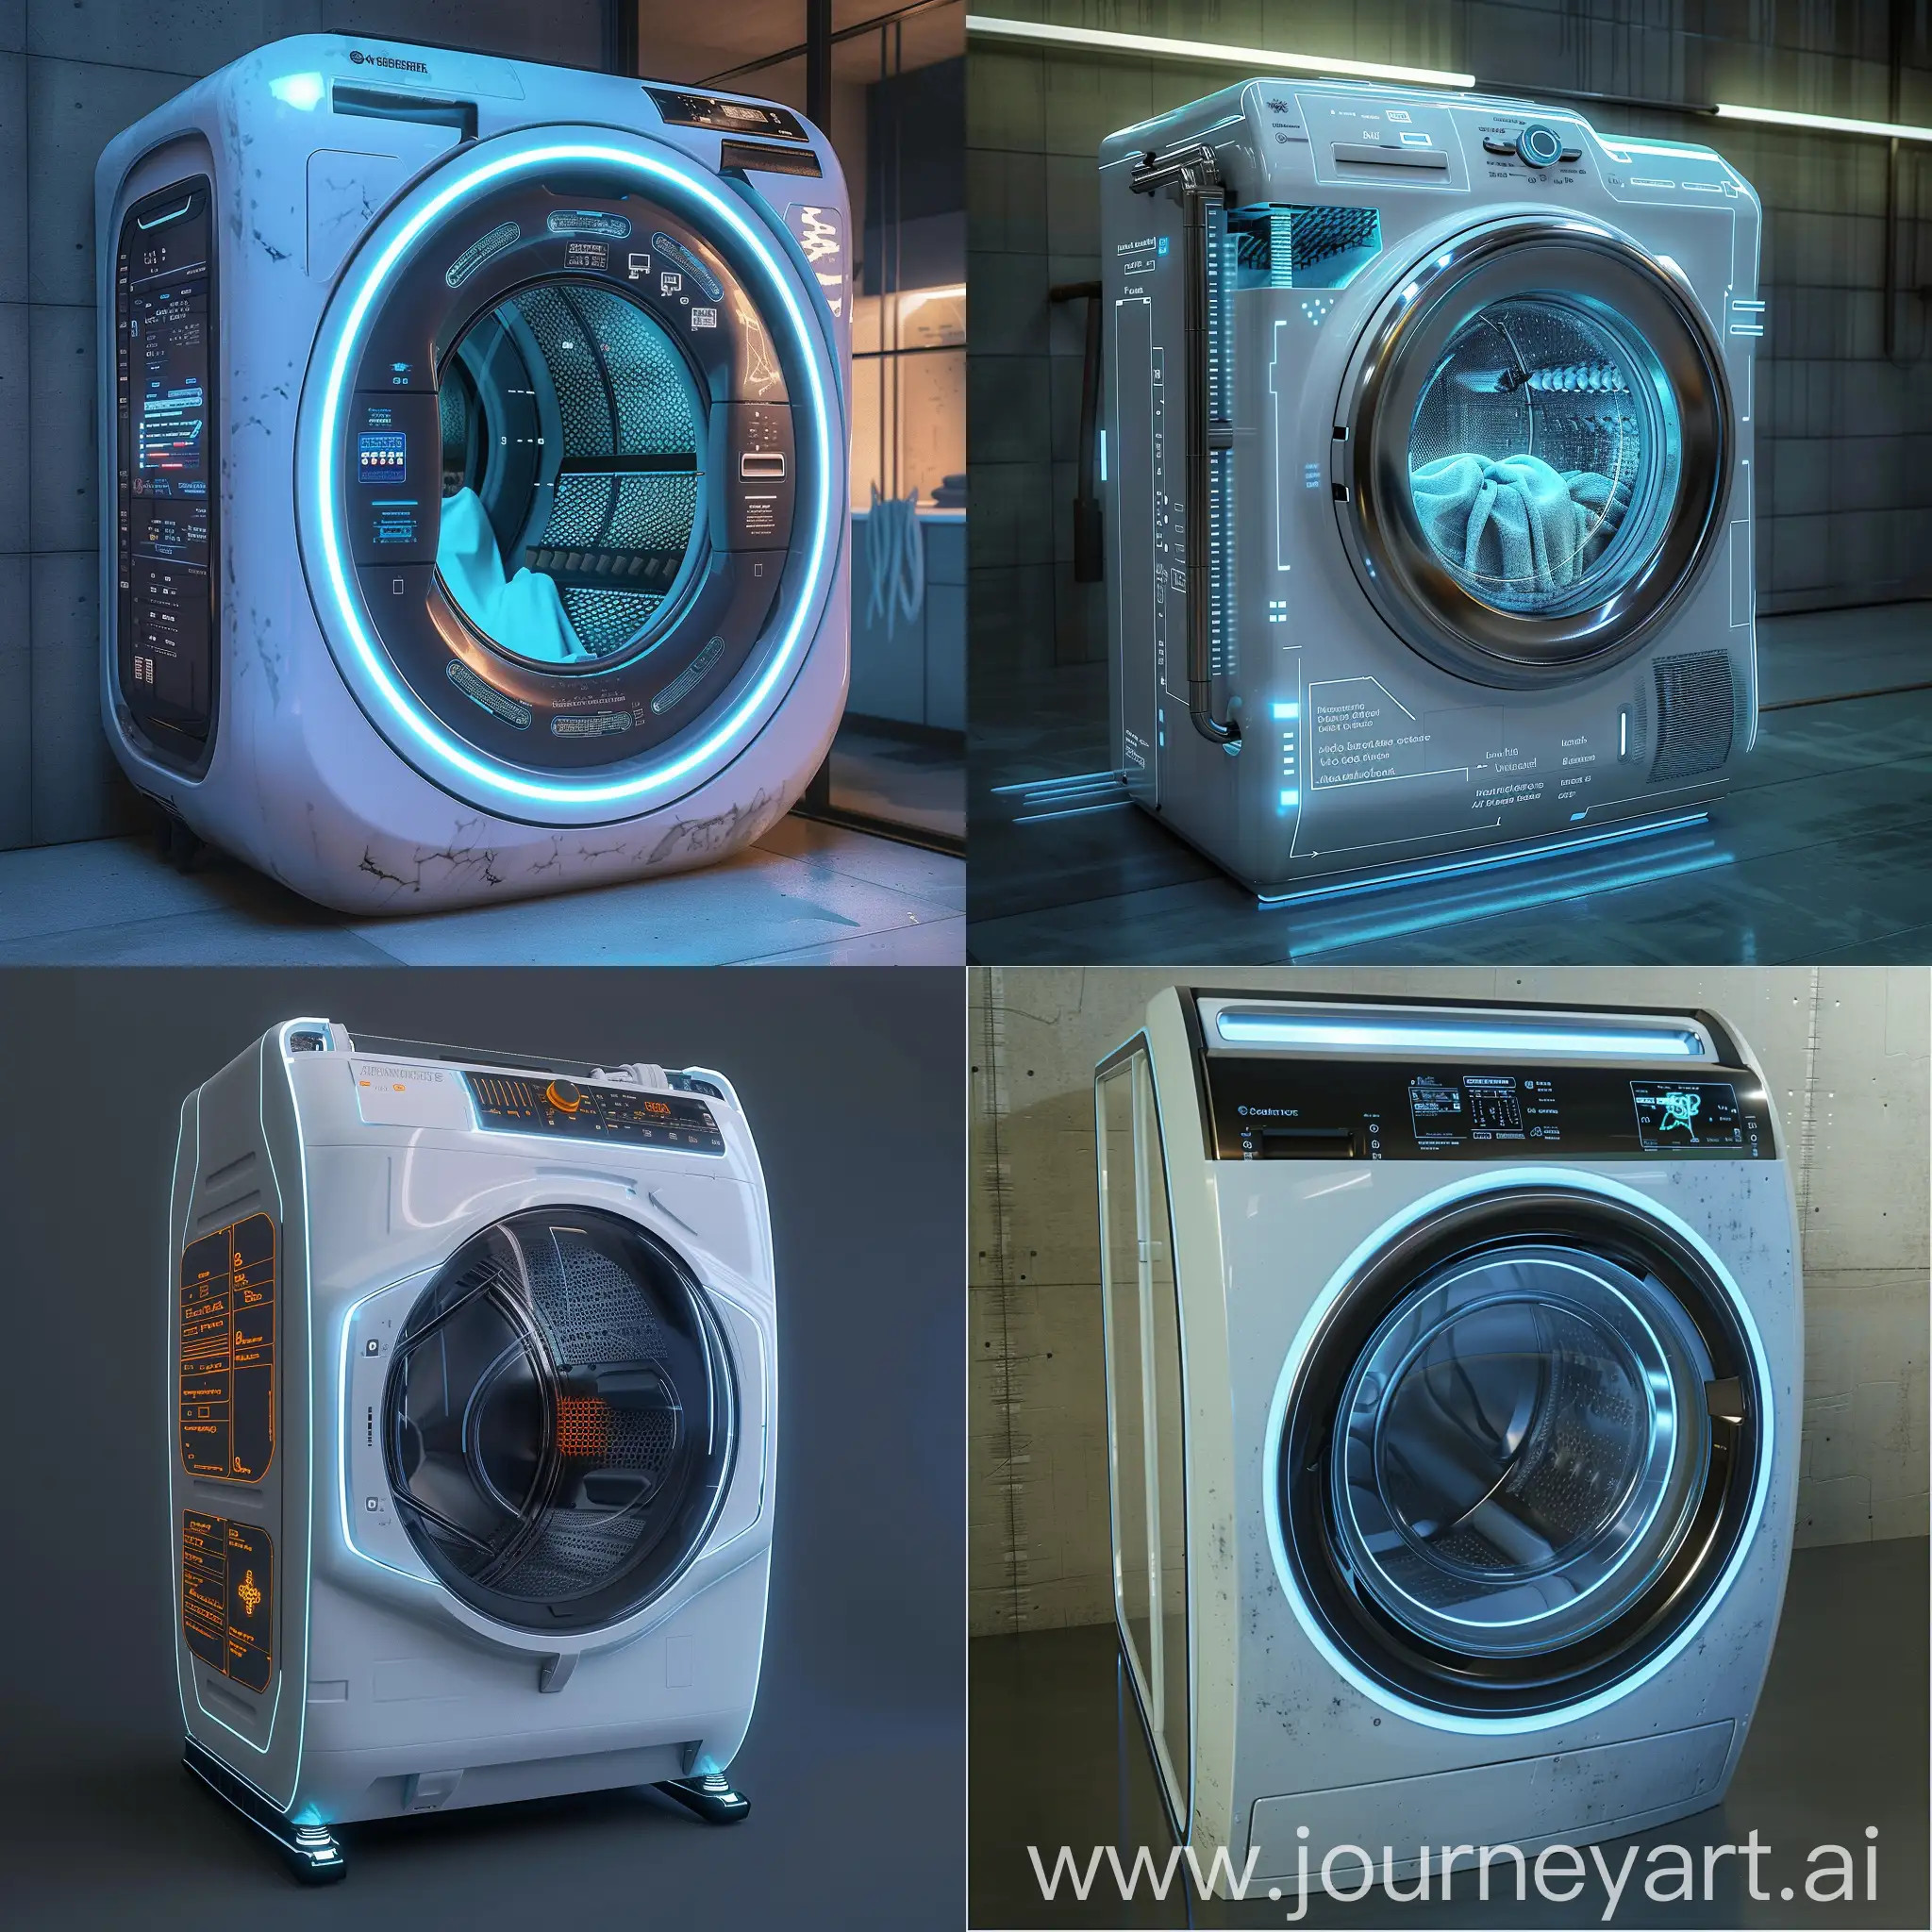 Futuristic-SelfCleaning-Washing-Machine-with-Advanced-Water-Recycling